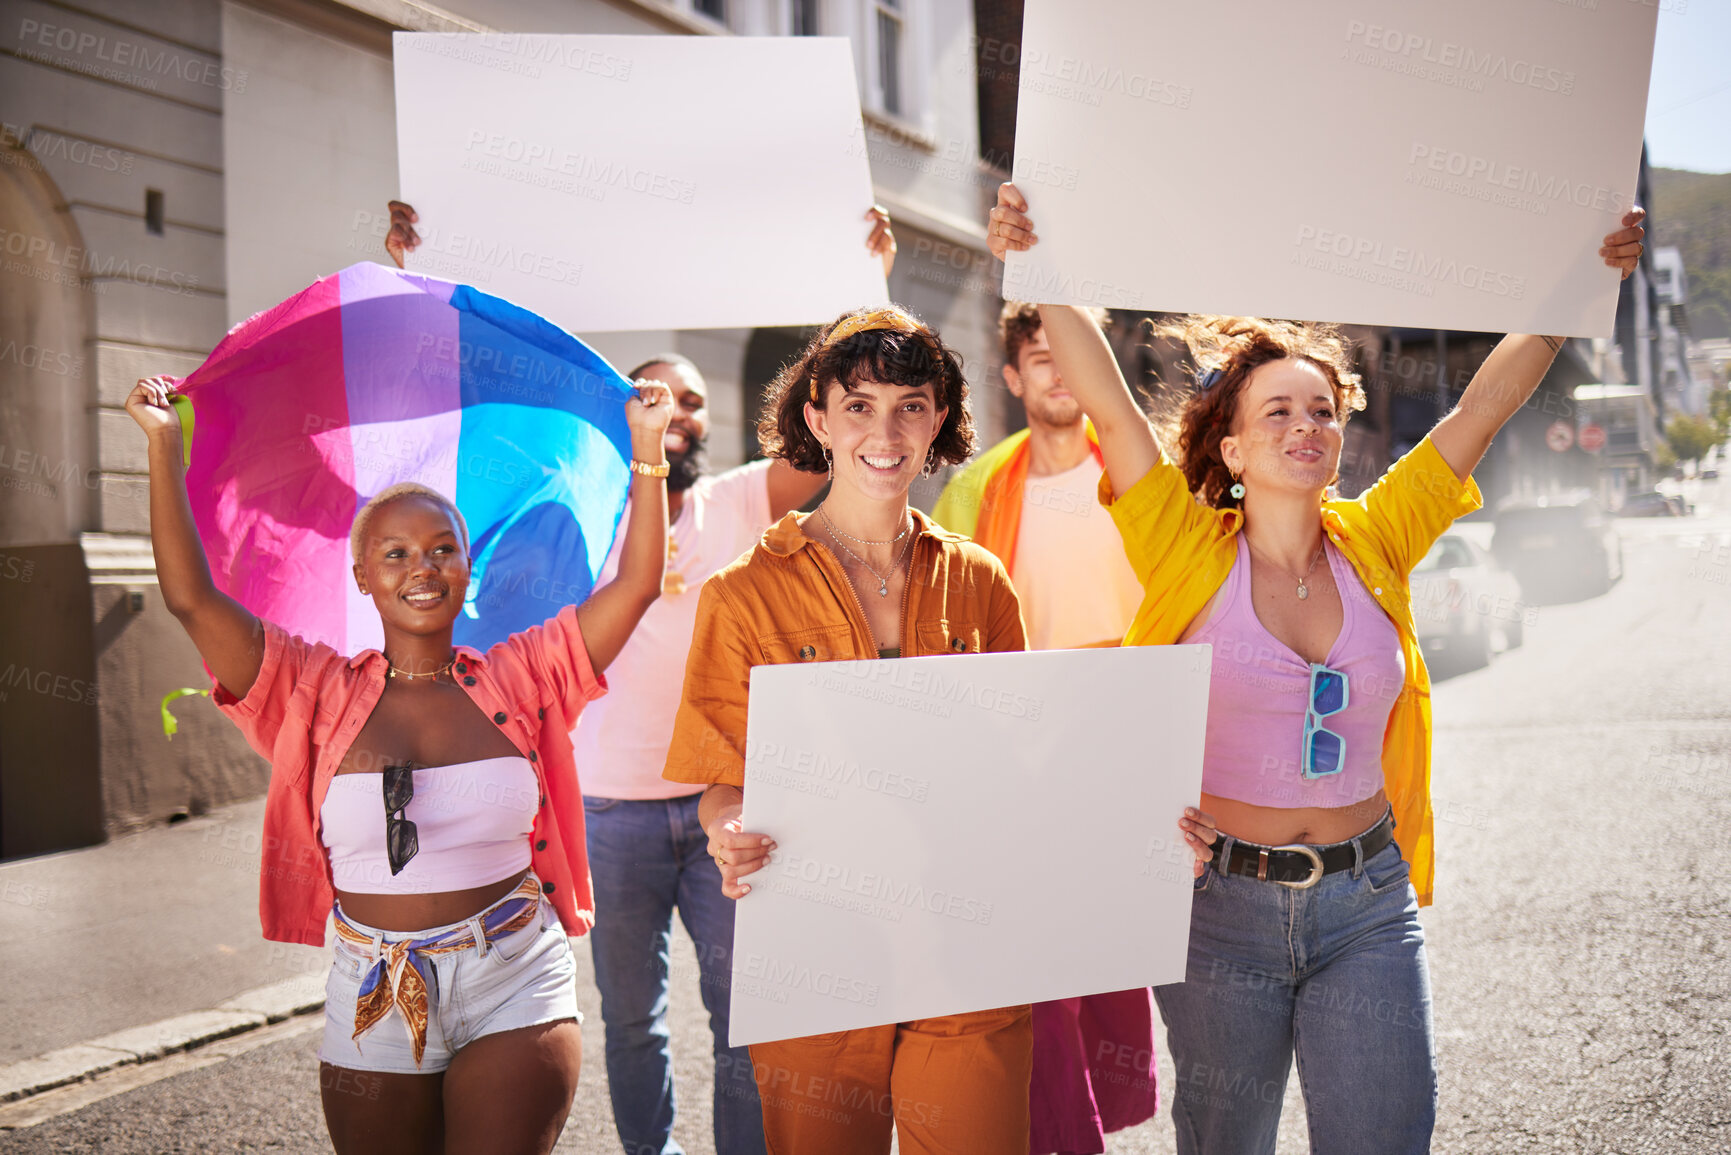 Buy stock photo Poster mockup, lgbt protest and people walking in city street for activism, human rights and equality. Freedom, diversity support and lgbtq community crowd with billboard space for social movement